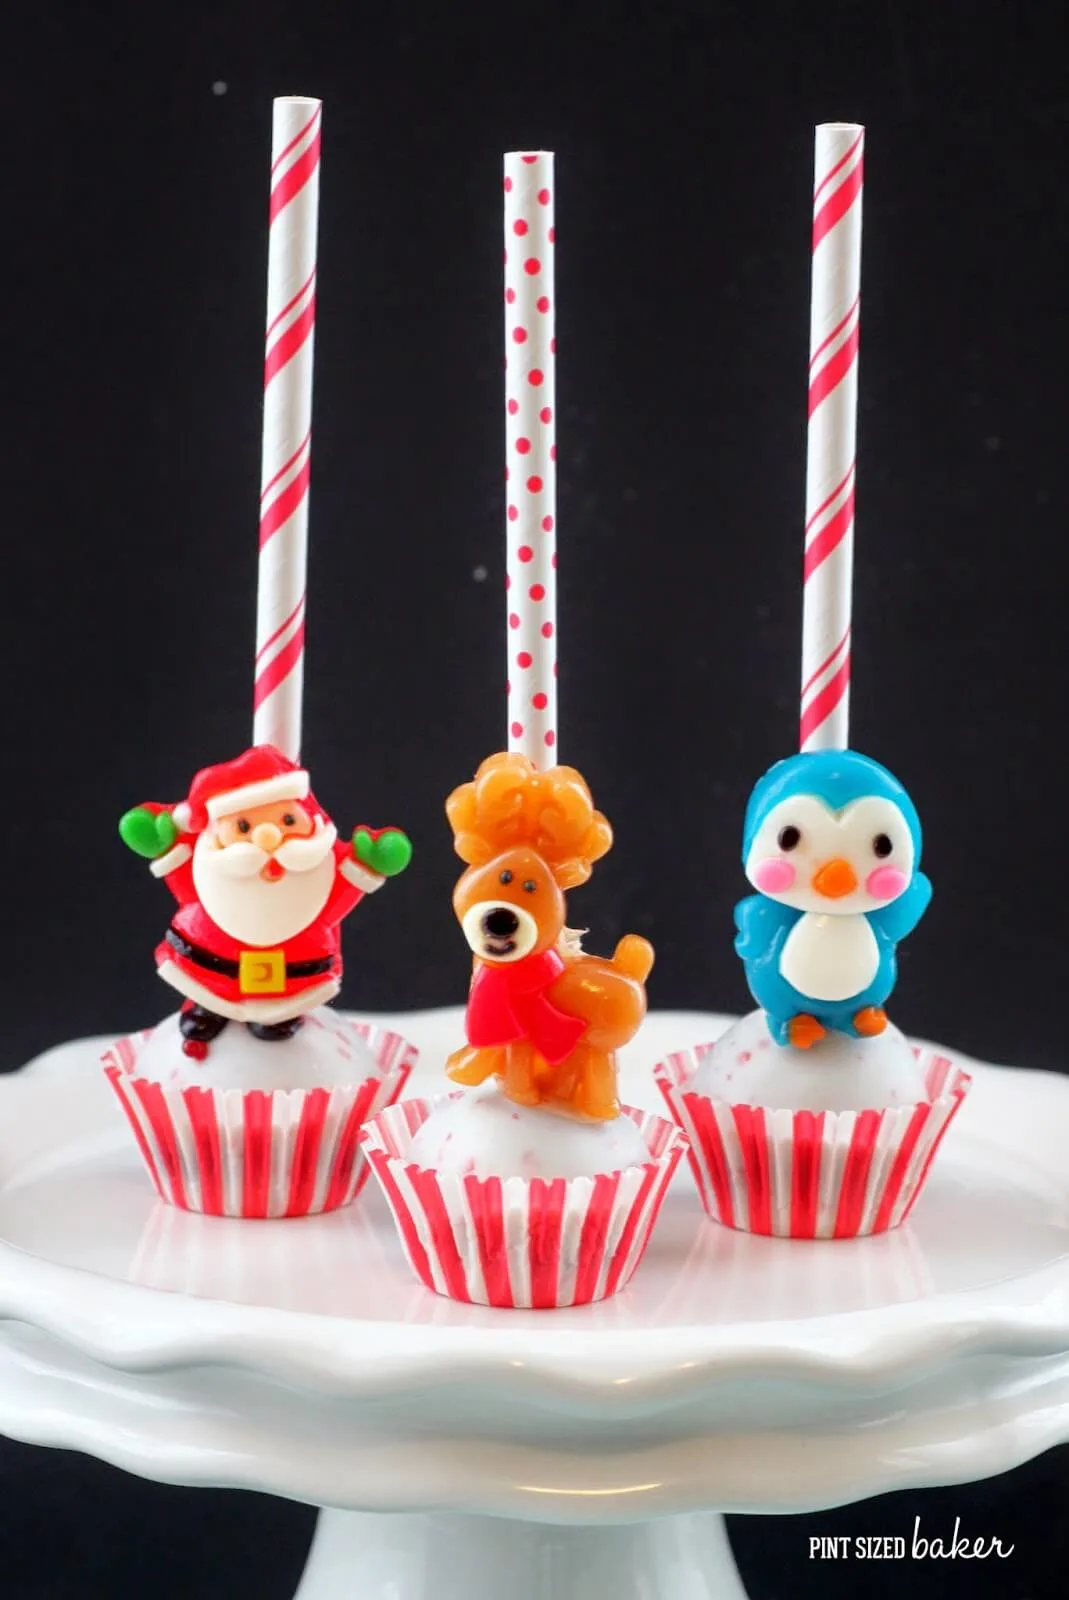 These Easy Christmas Cake Pops are so simple to make and look so adorable! Pick up the gummy candies at the store and make them for your holiday party.